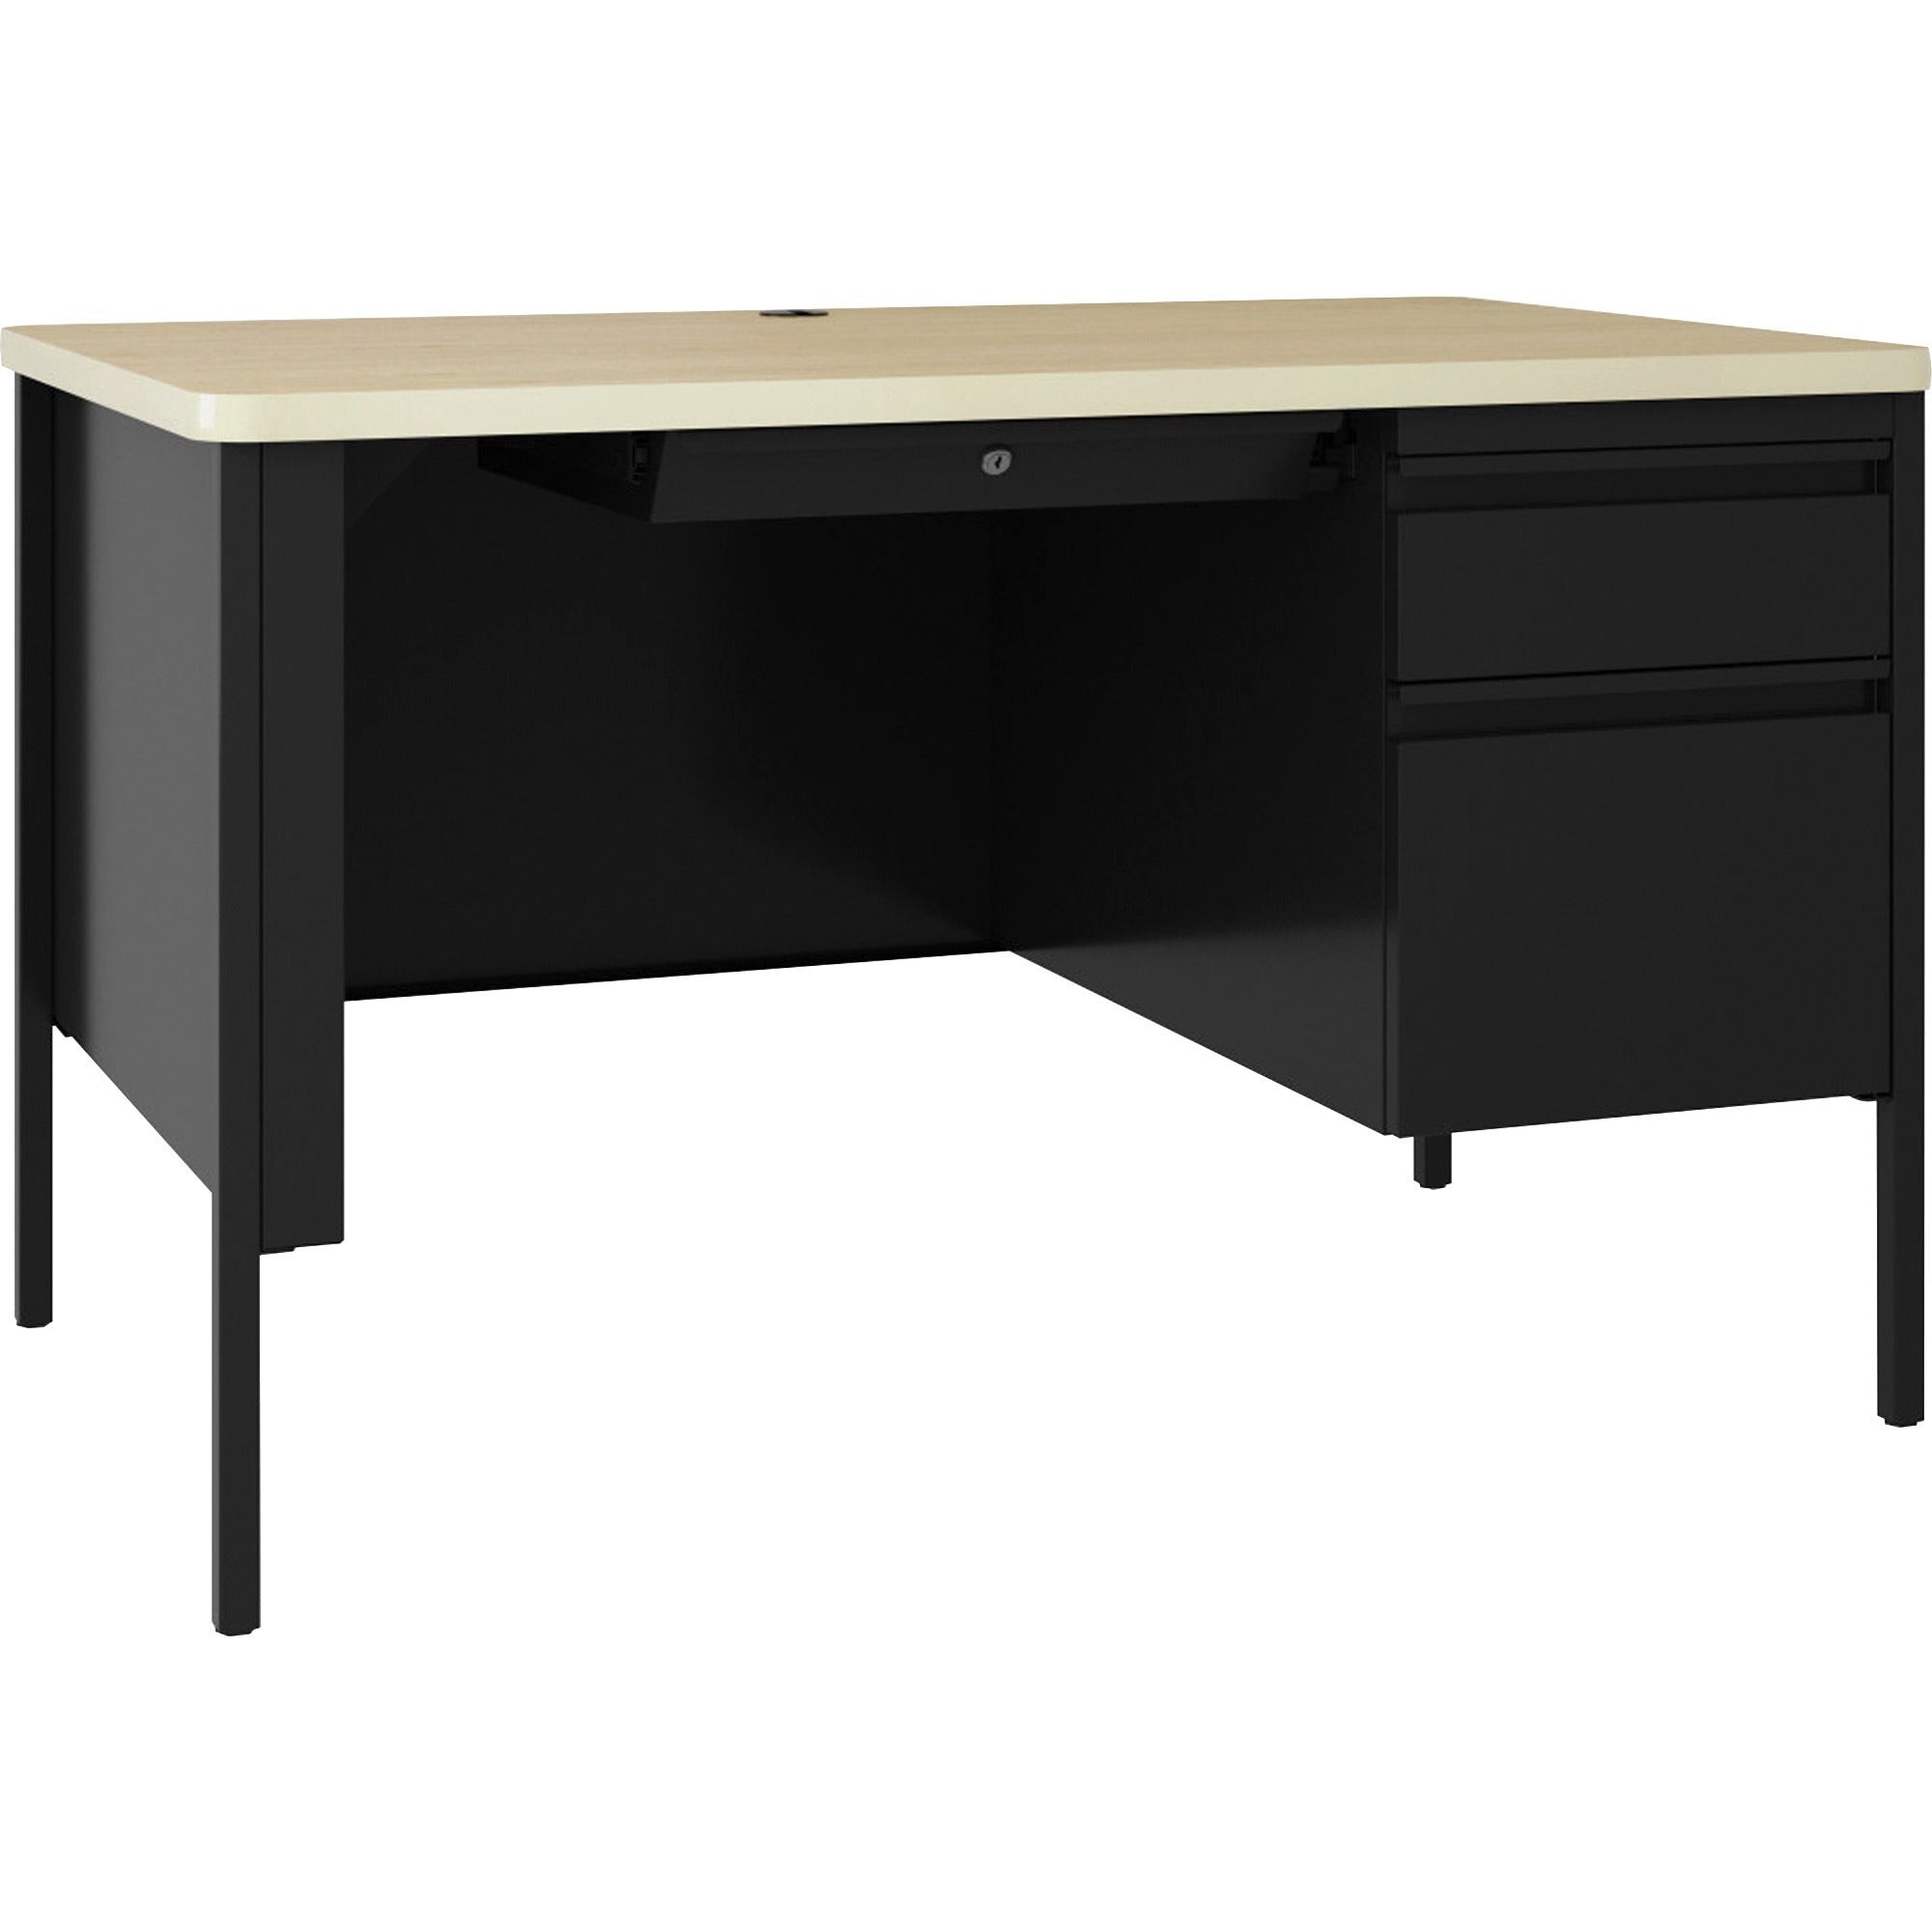 lorell-fortress-series-48-right-single-pedestal-desk-48-x-29530--08-modesty-panel-11-top-single-pedestal-on-right-side-square-edge-material-steel-finish-black_llr66907 - 1